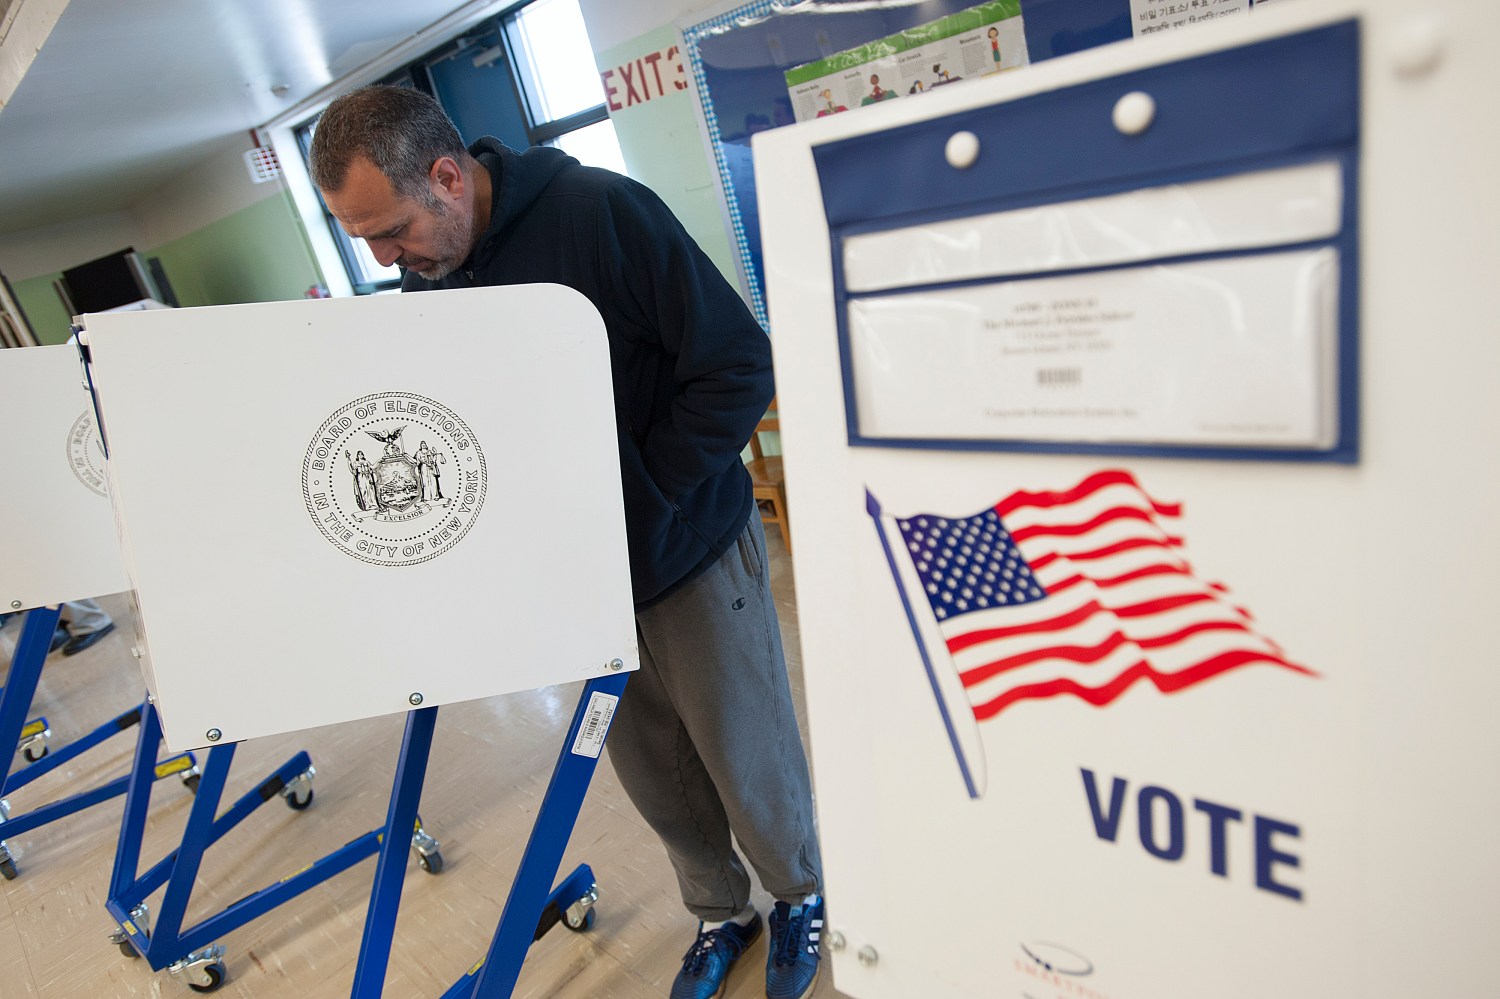 A voter casts his ballot behind a ballot booth during the U.S. presidential election at a polling station in the Staten Island Borough of New York.